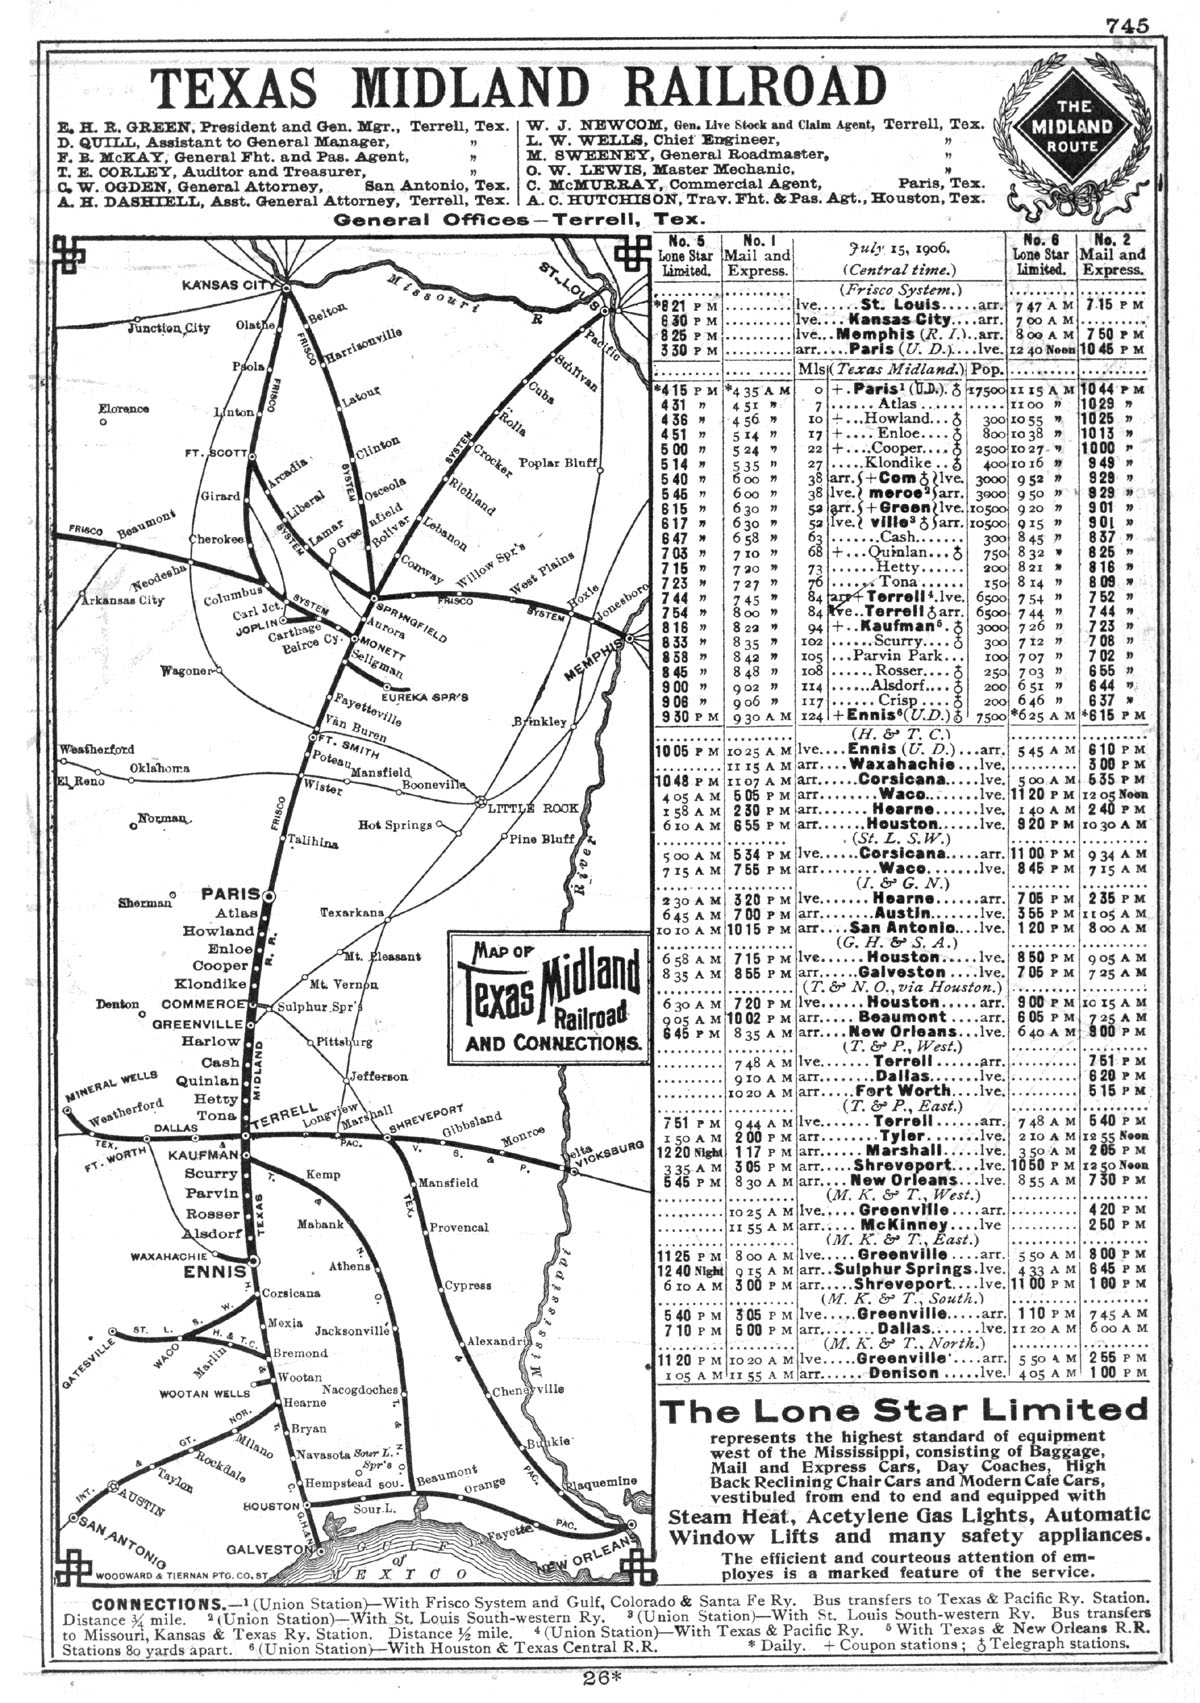 Texas Midland Railroad Company (Tex.), Public Timetable and Map Showing Route in 1906.